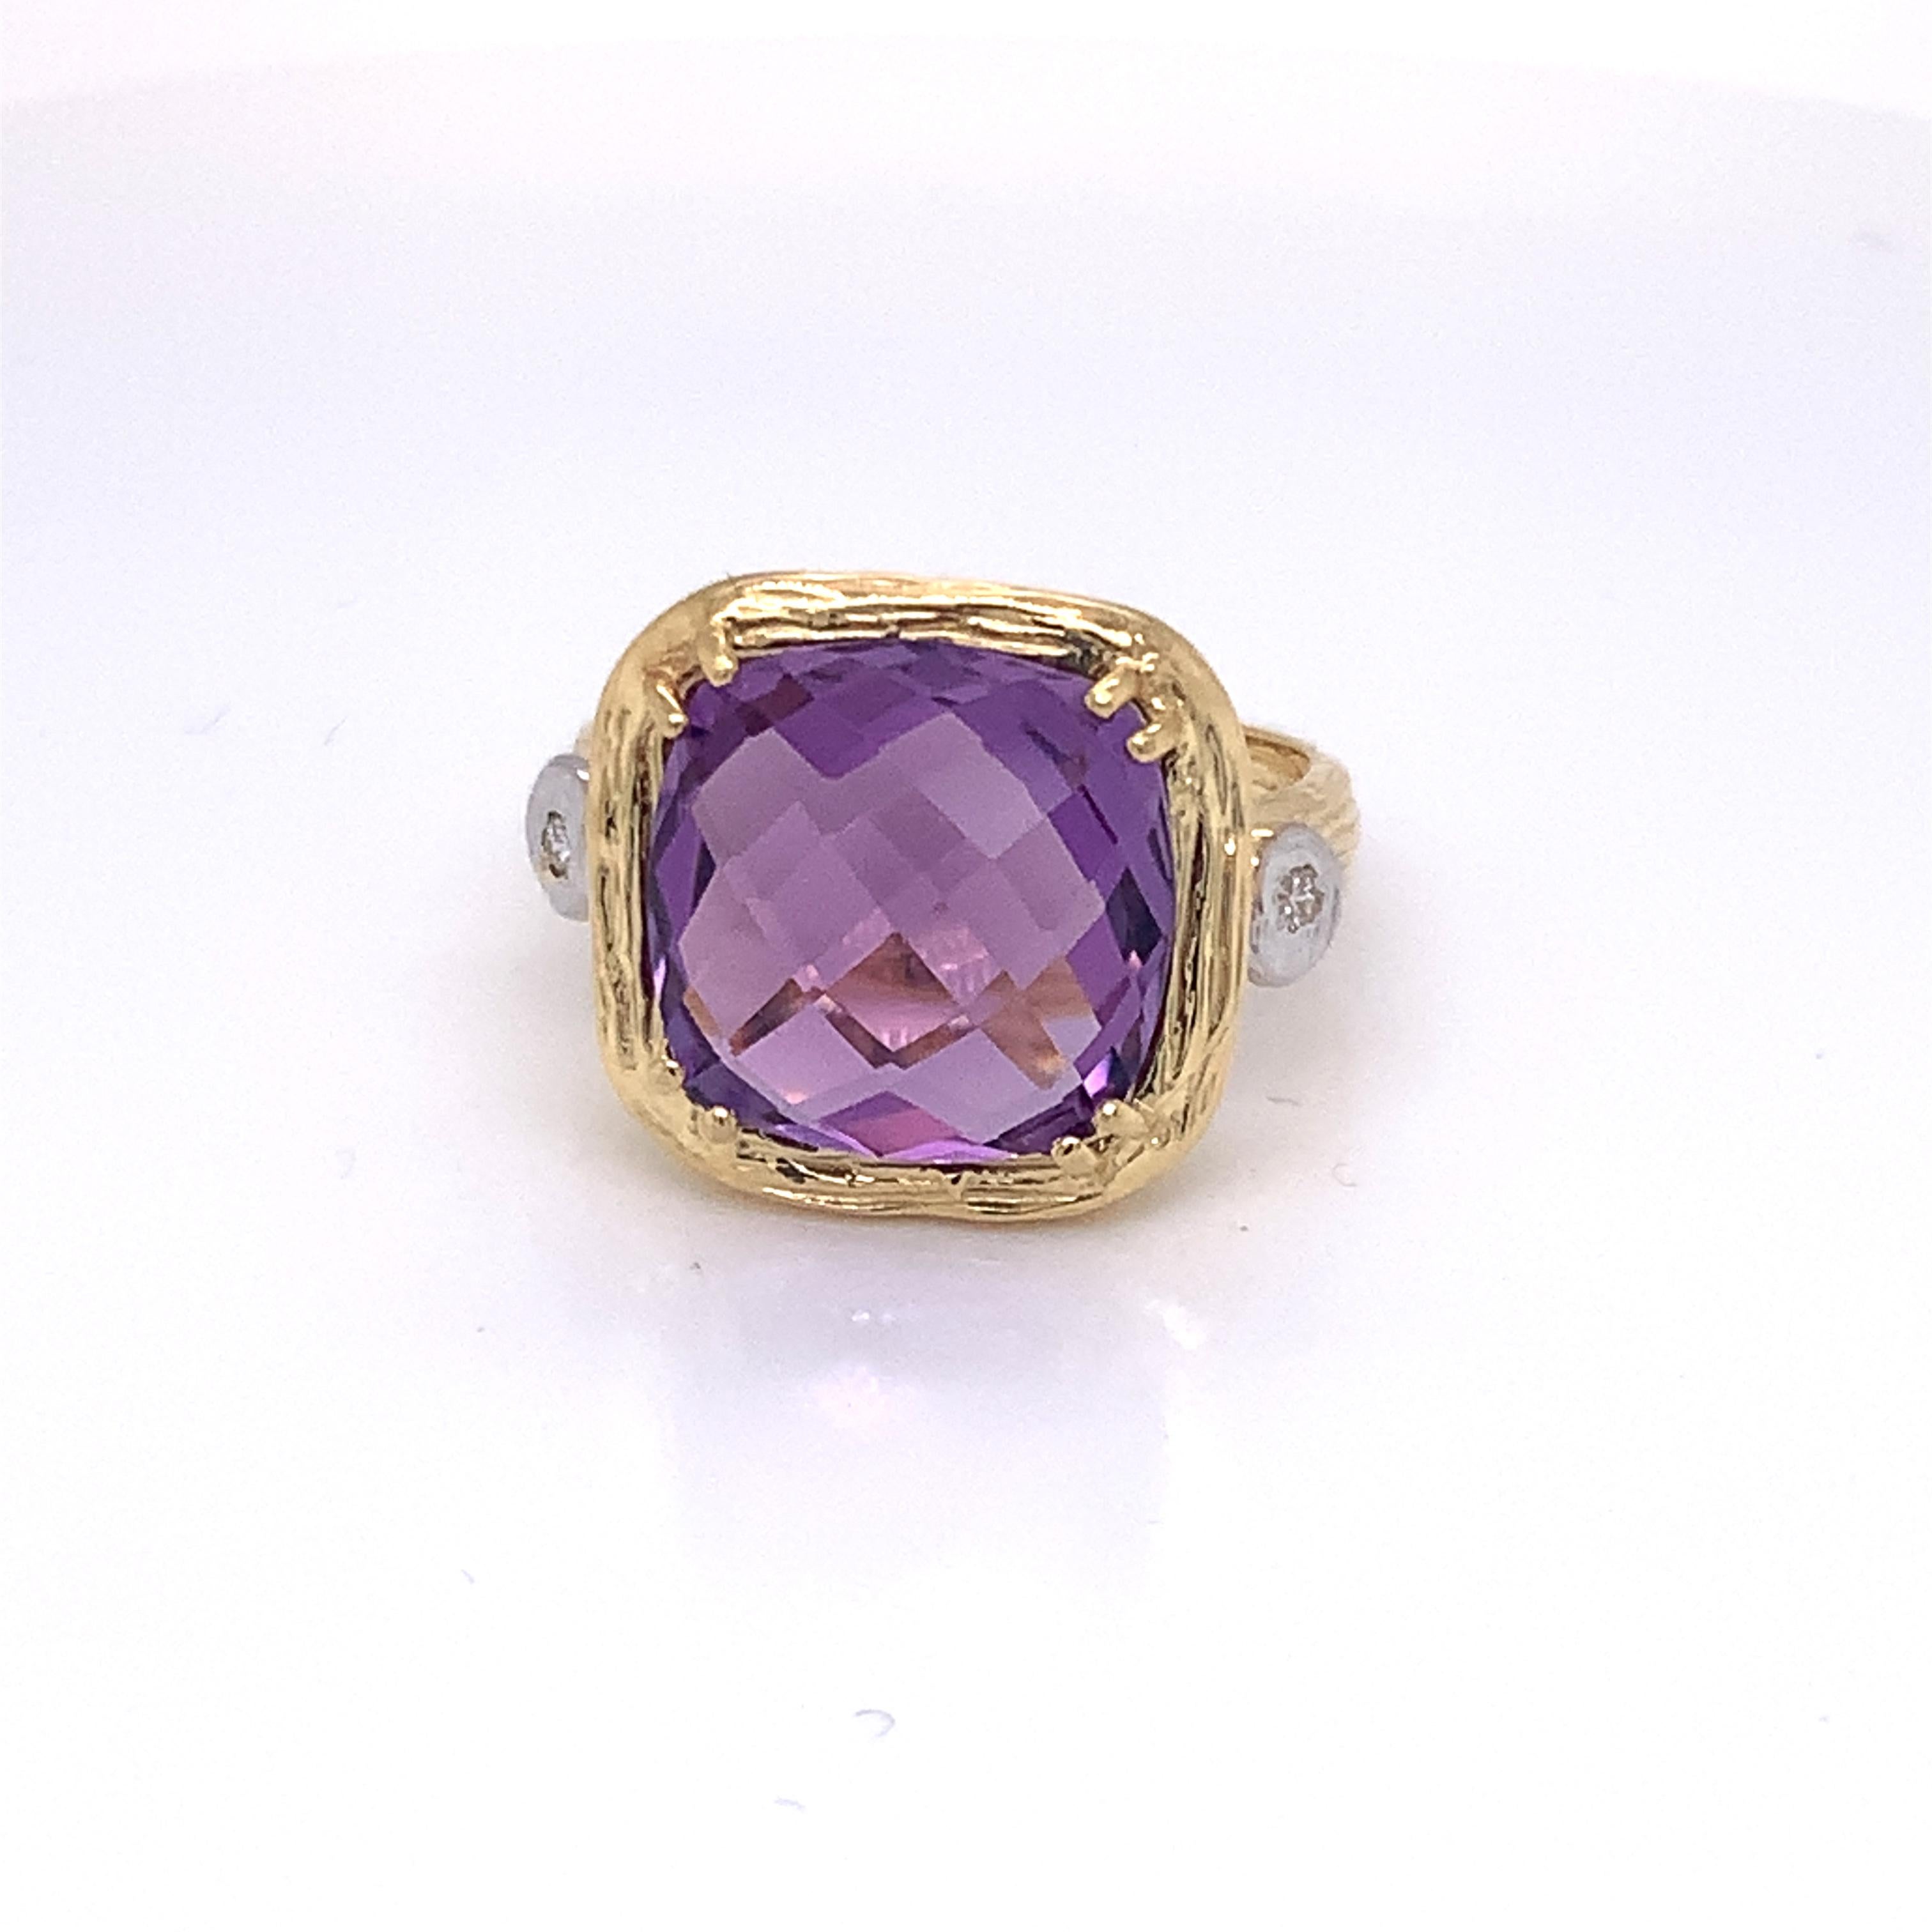 For Sale:  Hand-Crafted 14 Karat Yellow Gold Amethyst Color Stone Ring 2